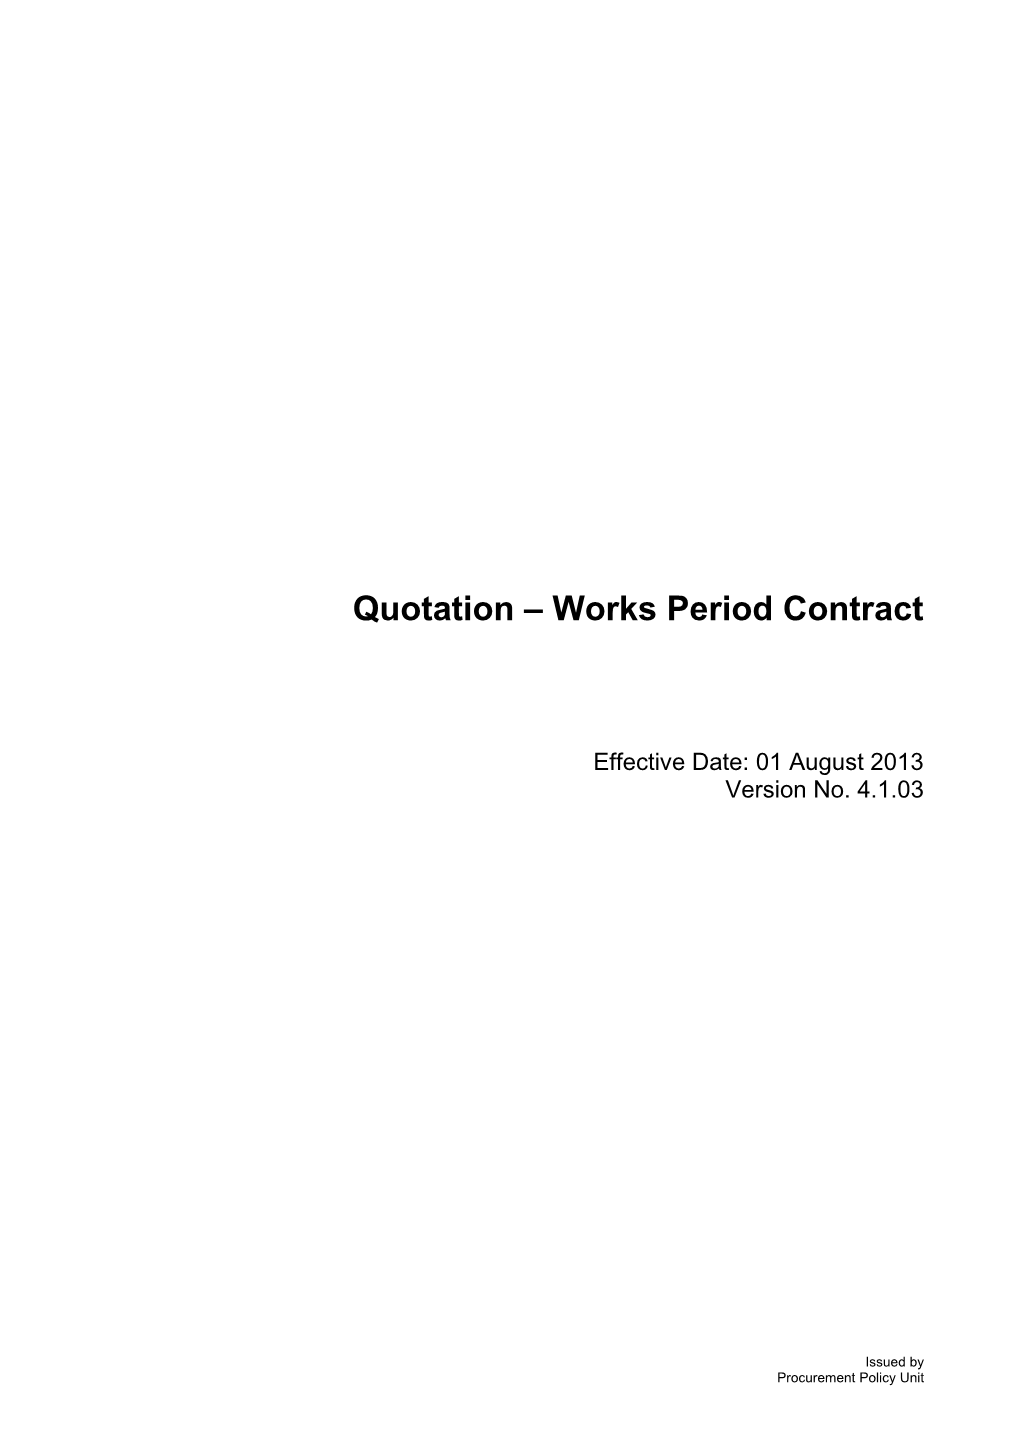 Quotation Works Period Contract - V 4.1.03 (01 August 2013)